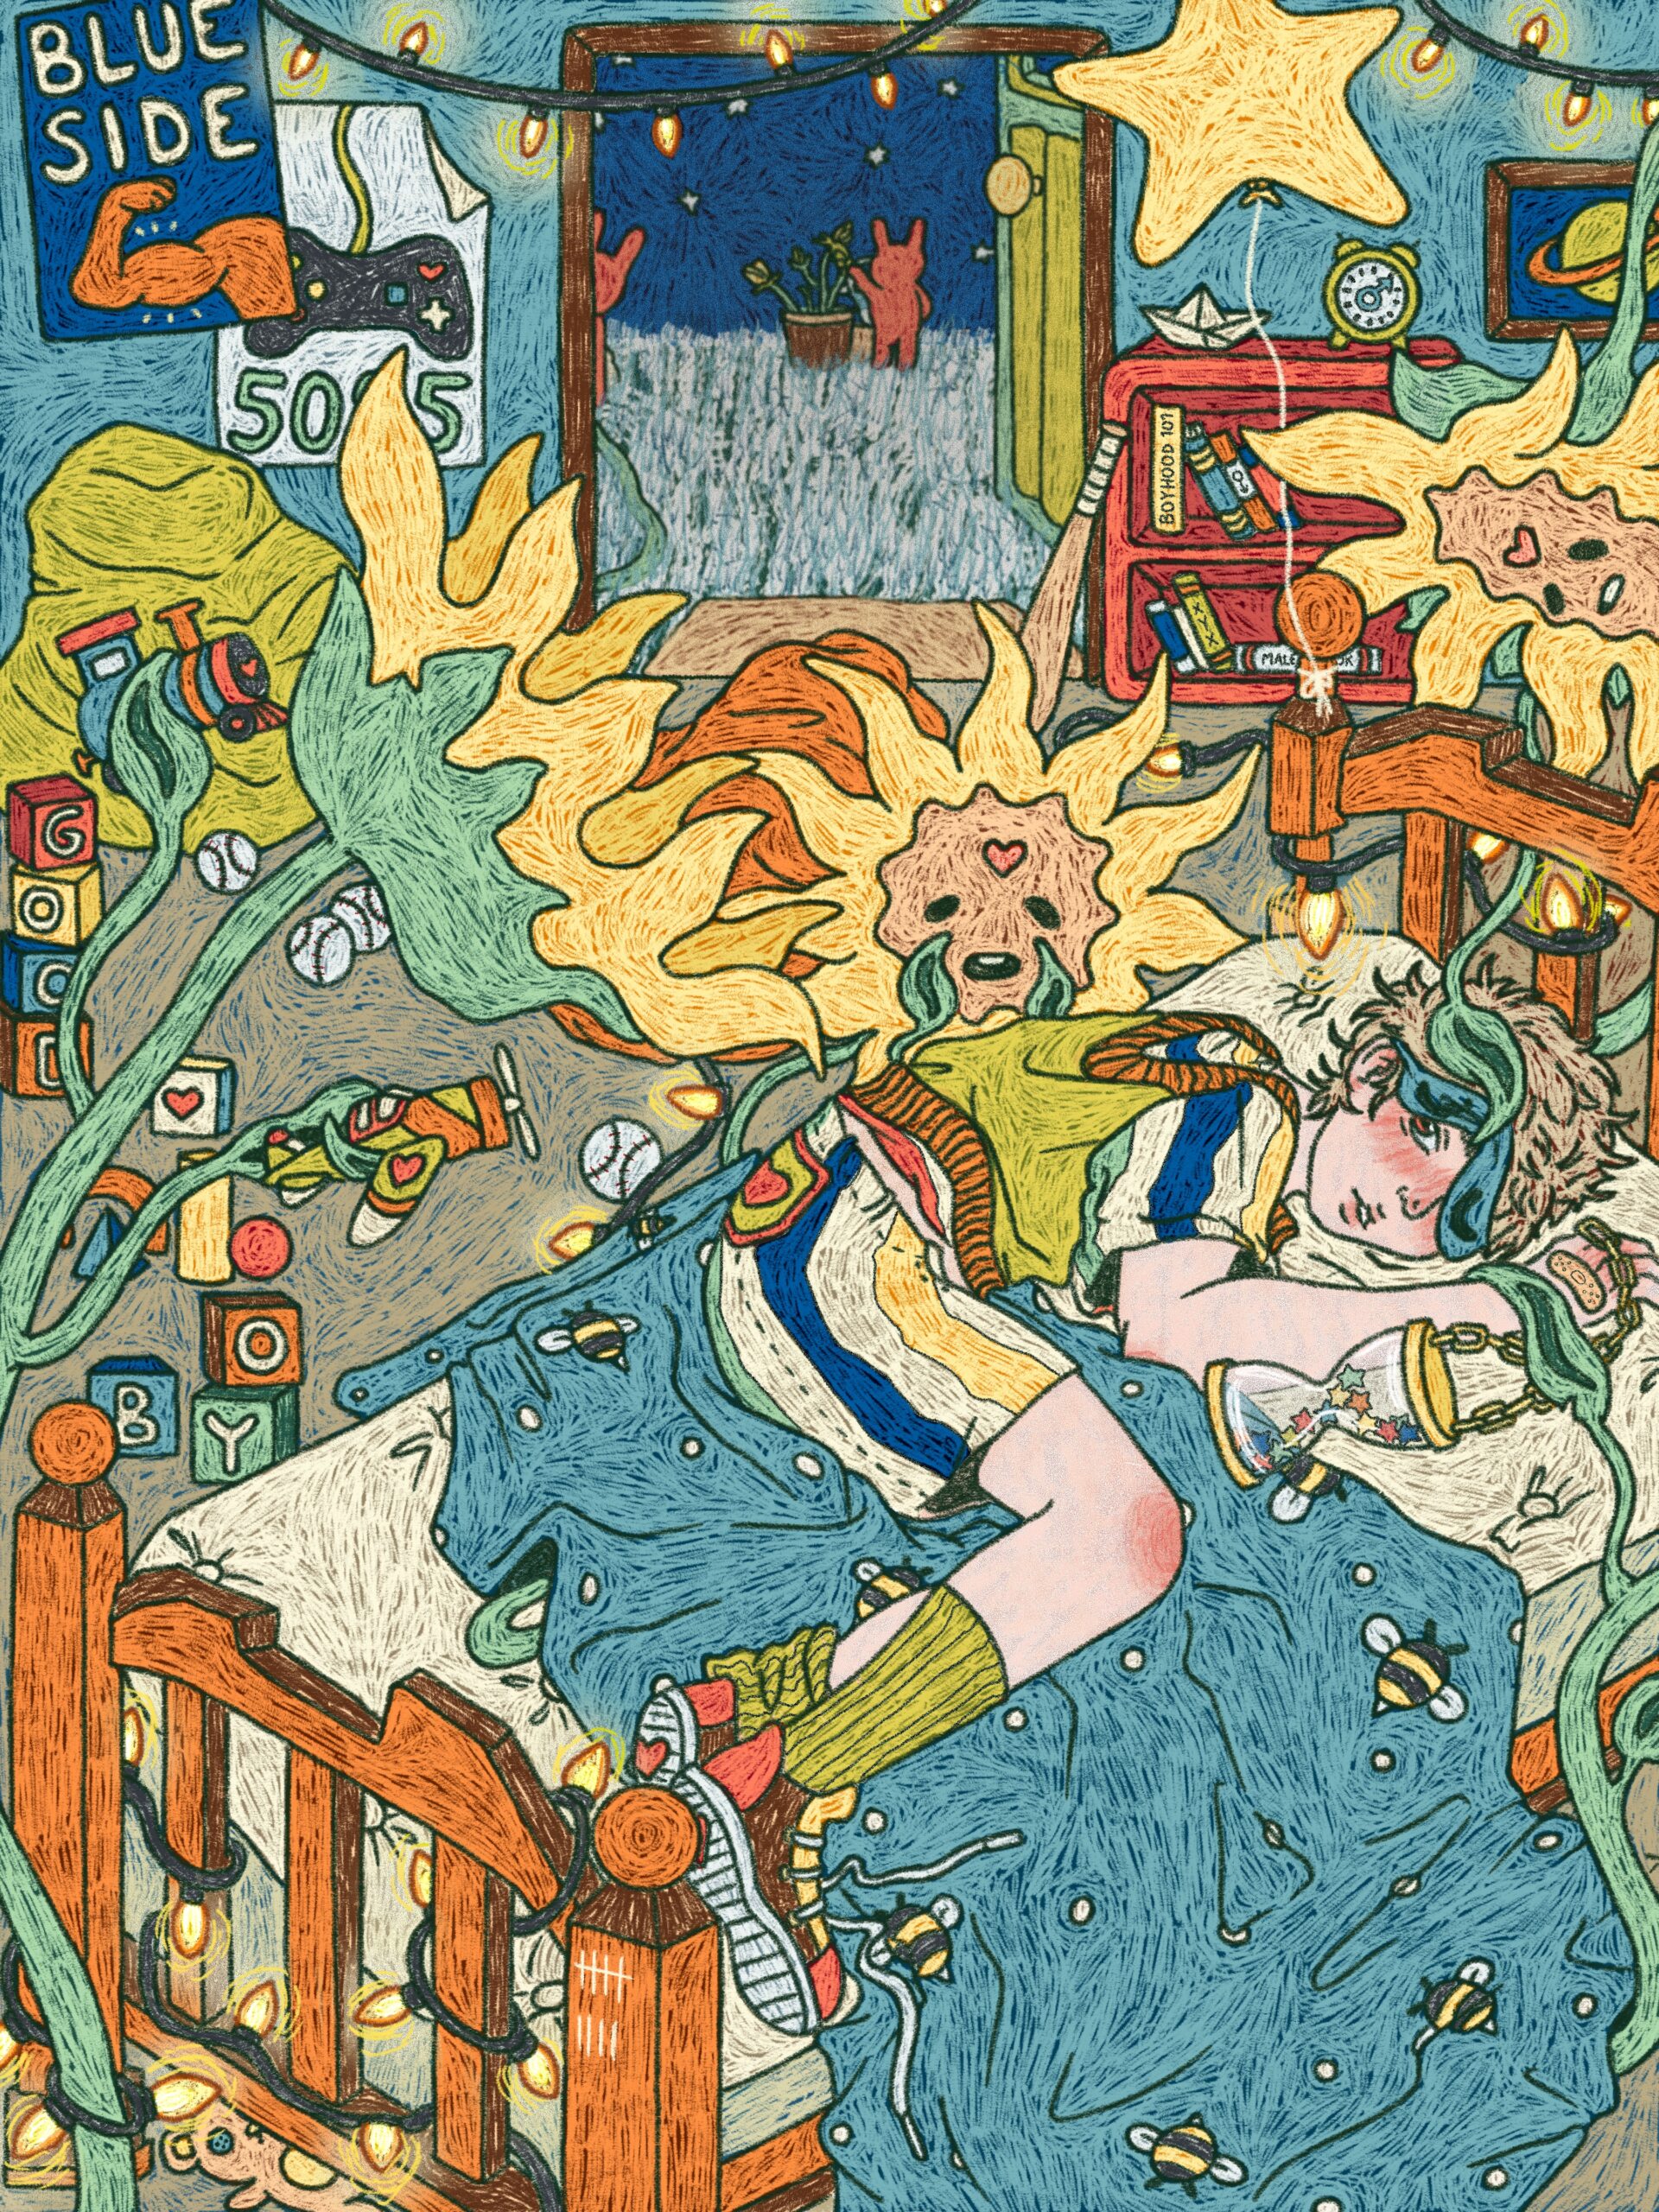 In this chaotic scene, a young pale person lies in the fetal position on a bed, tangled in blue sheets, grasping a sand-timer hourglass filled with stars. The figure is peeking at us from under a sleep mask and wearing a sweater vest and brightly striped shorts. Items and symbols associated with masculinity litter the room – toy airplane and train, blocks spelling BOY, posters of video game controller and muscle-man, baseball bat. Large anxious anthropomorphized sunflowers lean in urgently to communicate with the figure.